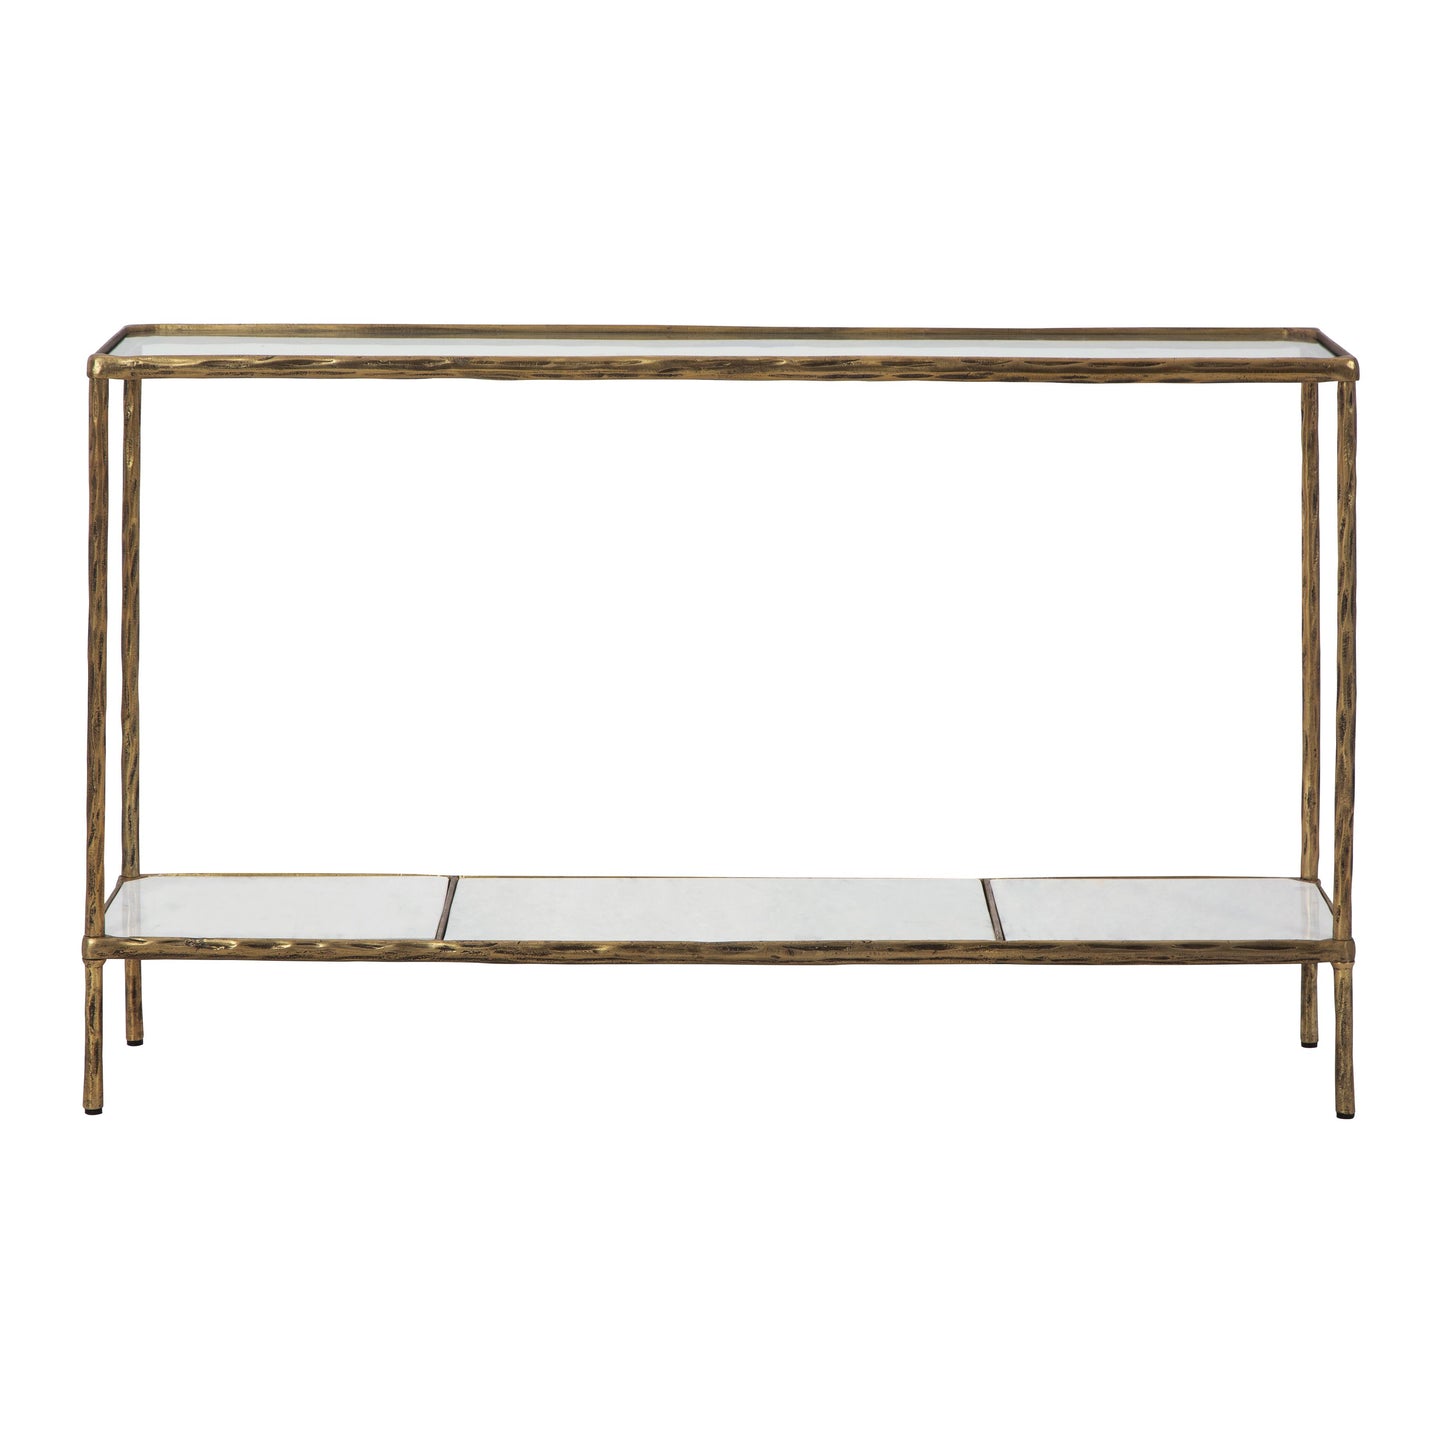 Signature Design by Ashley Ryandale Console Table A4000443 IMAGE 2